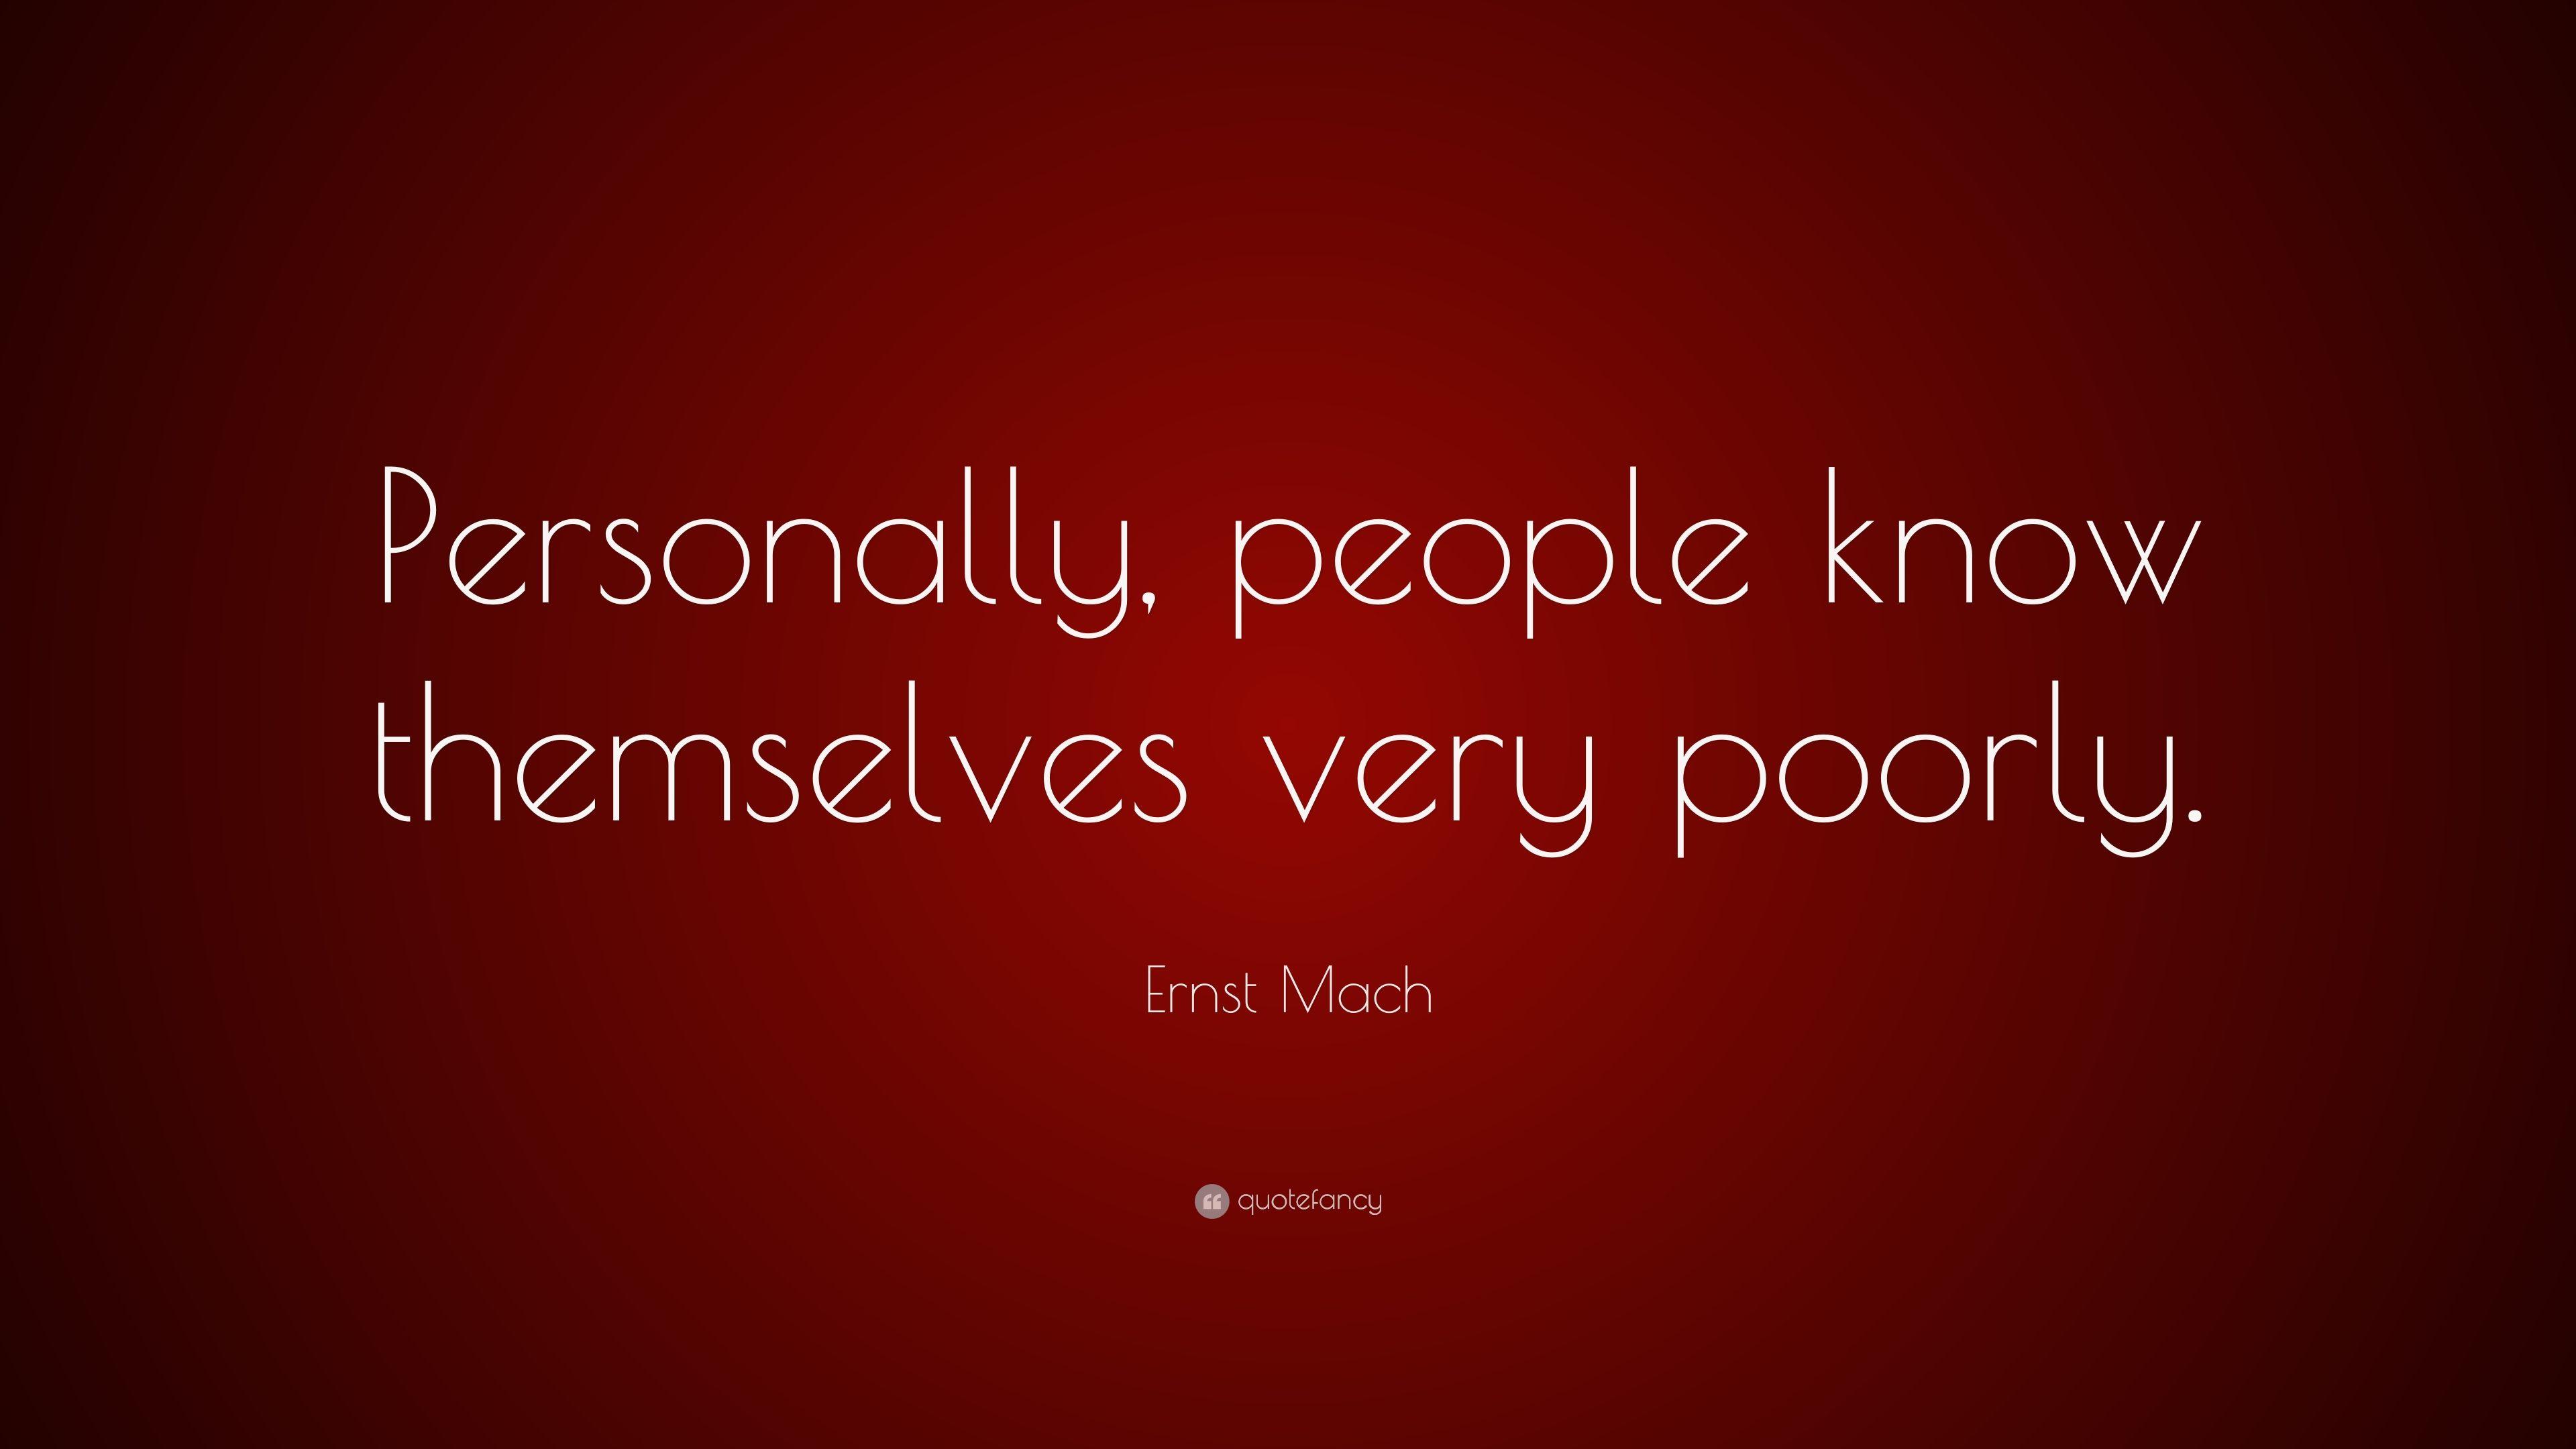 Ernst Mach Quote: “Personally, people know themselves very poorly